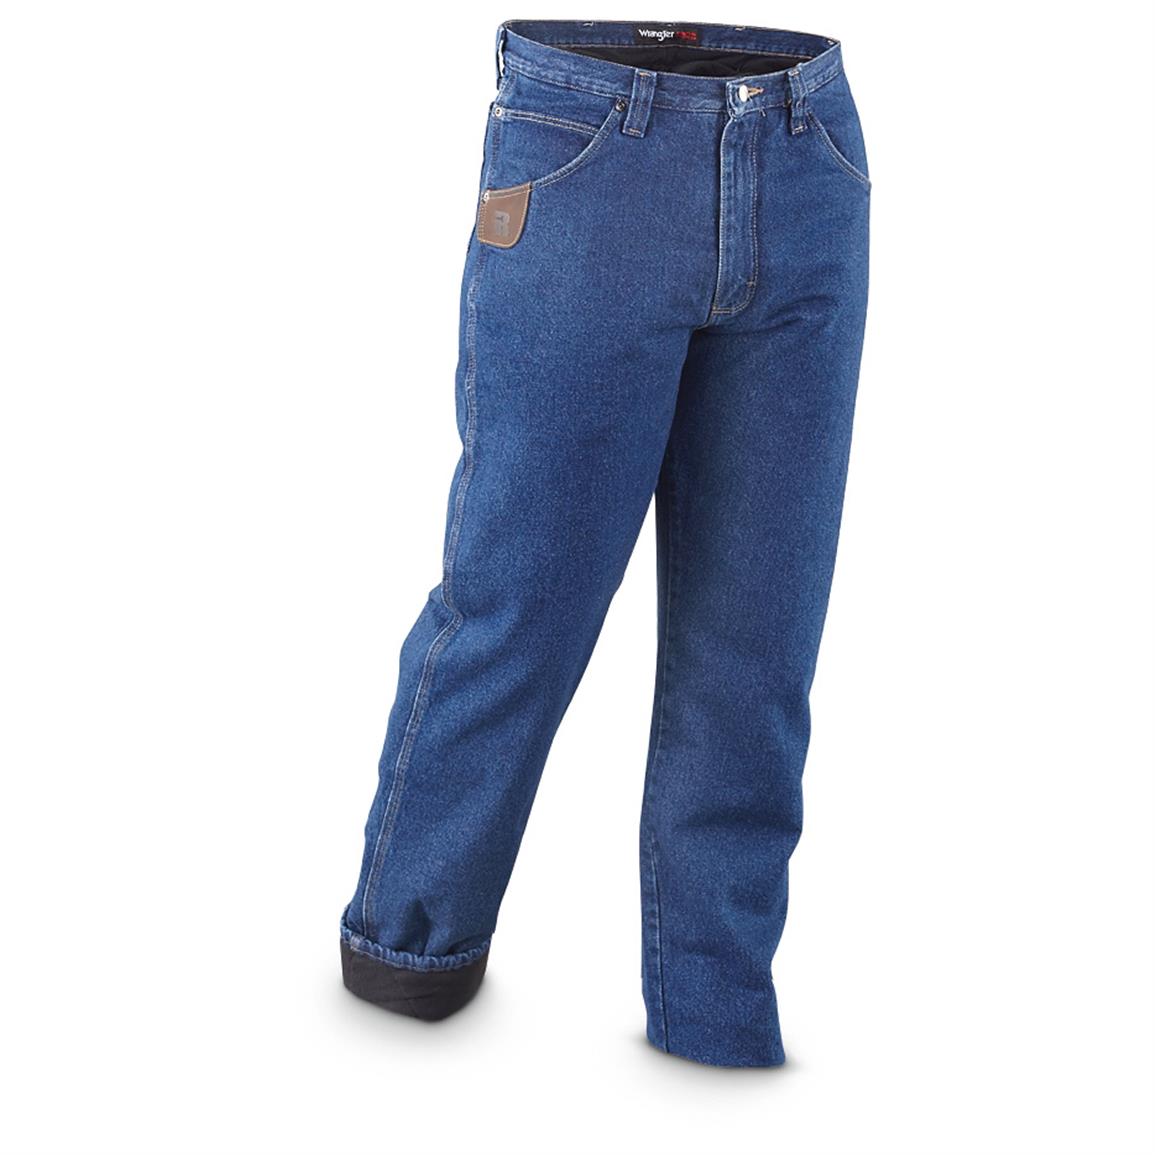 Riggs Workwear Men's Thinsulate Lined Relaxed-Fit Jeans - 221668 ...